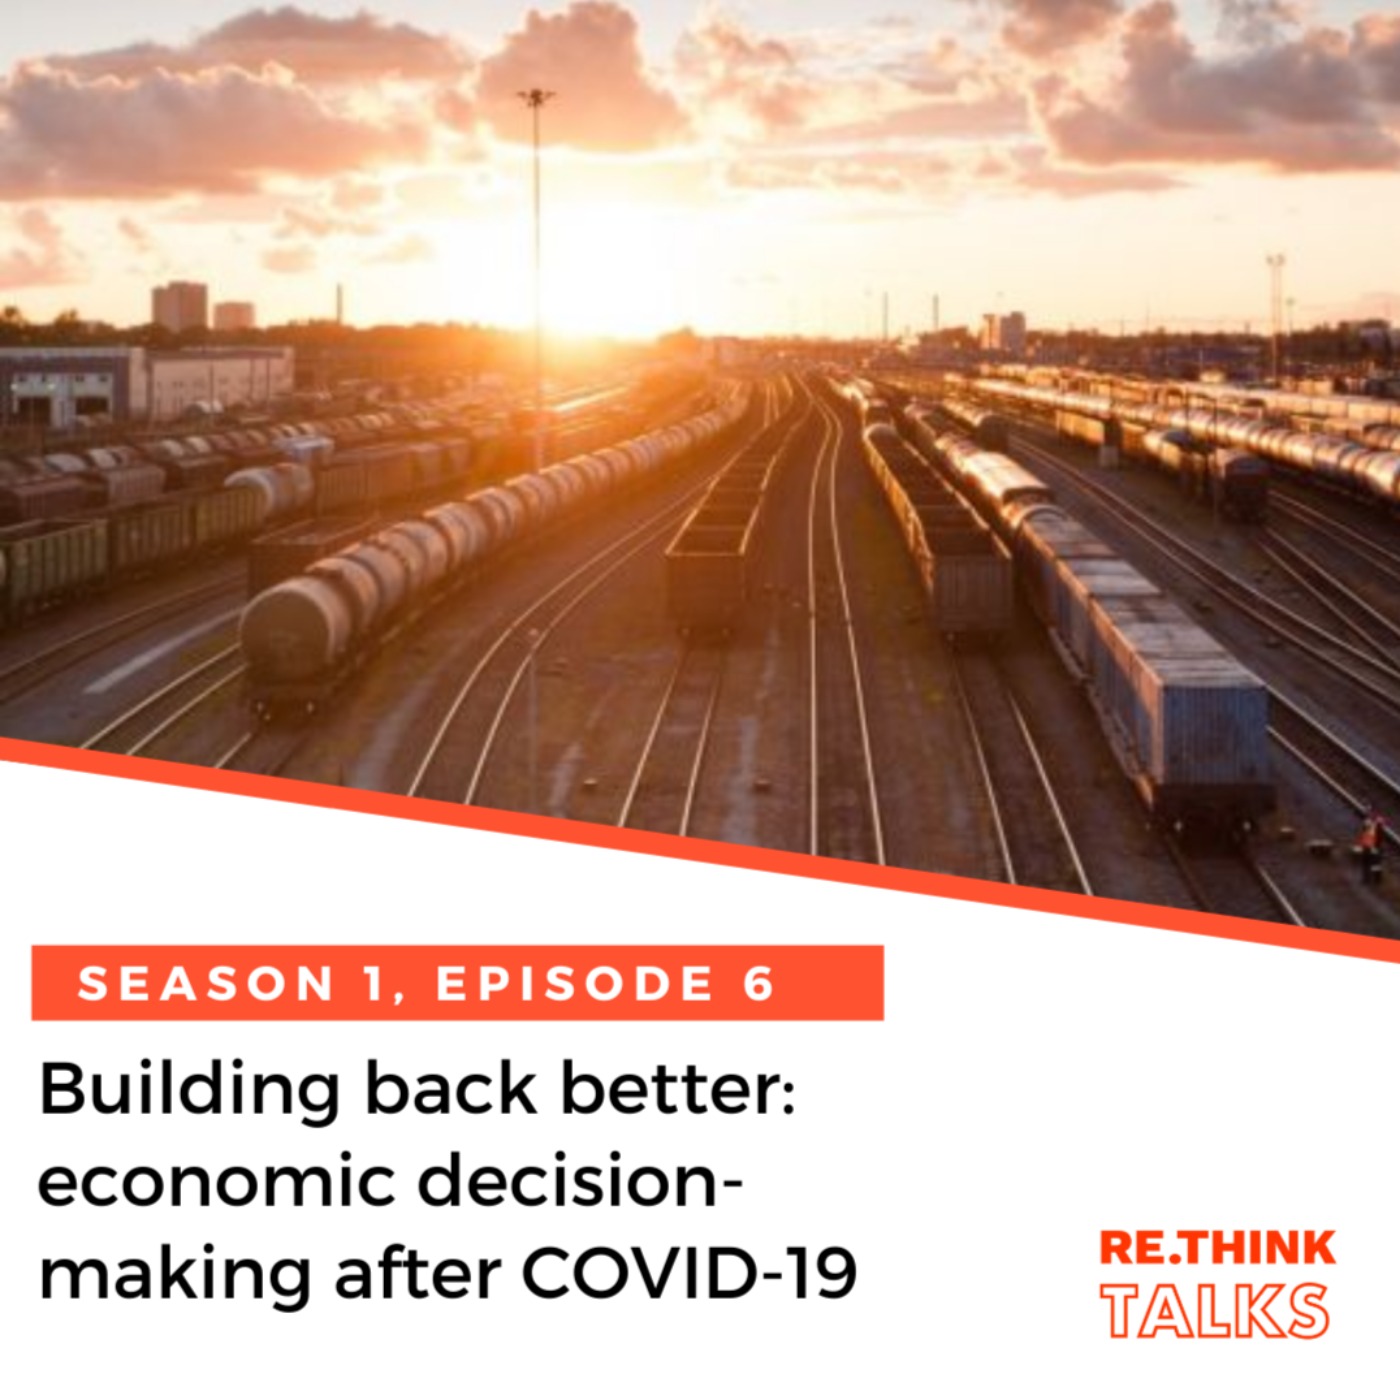 Building back better: economic decision-making after COVID-19